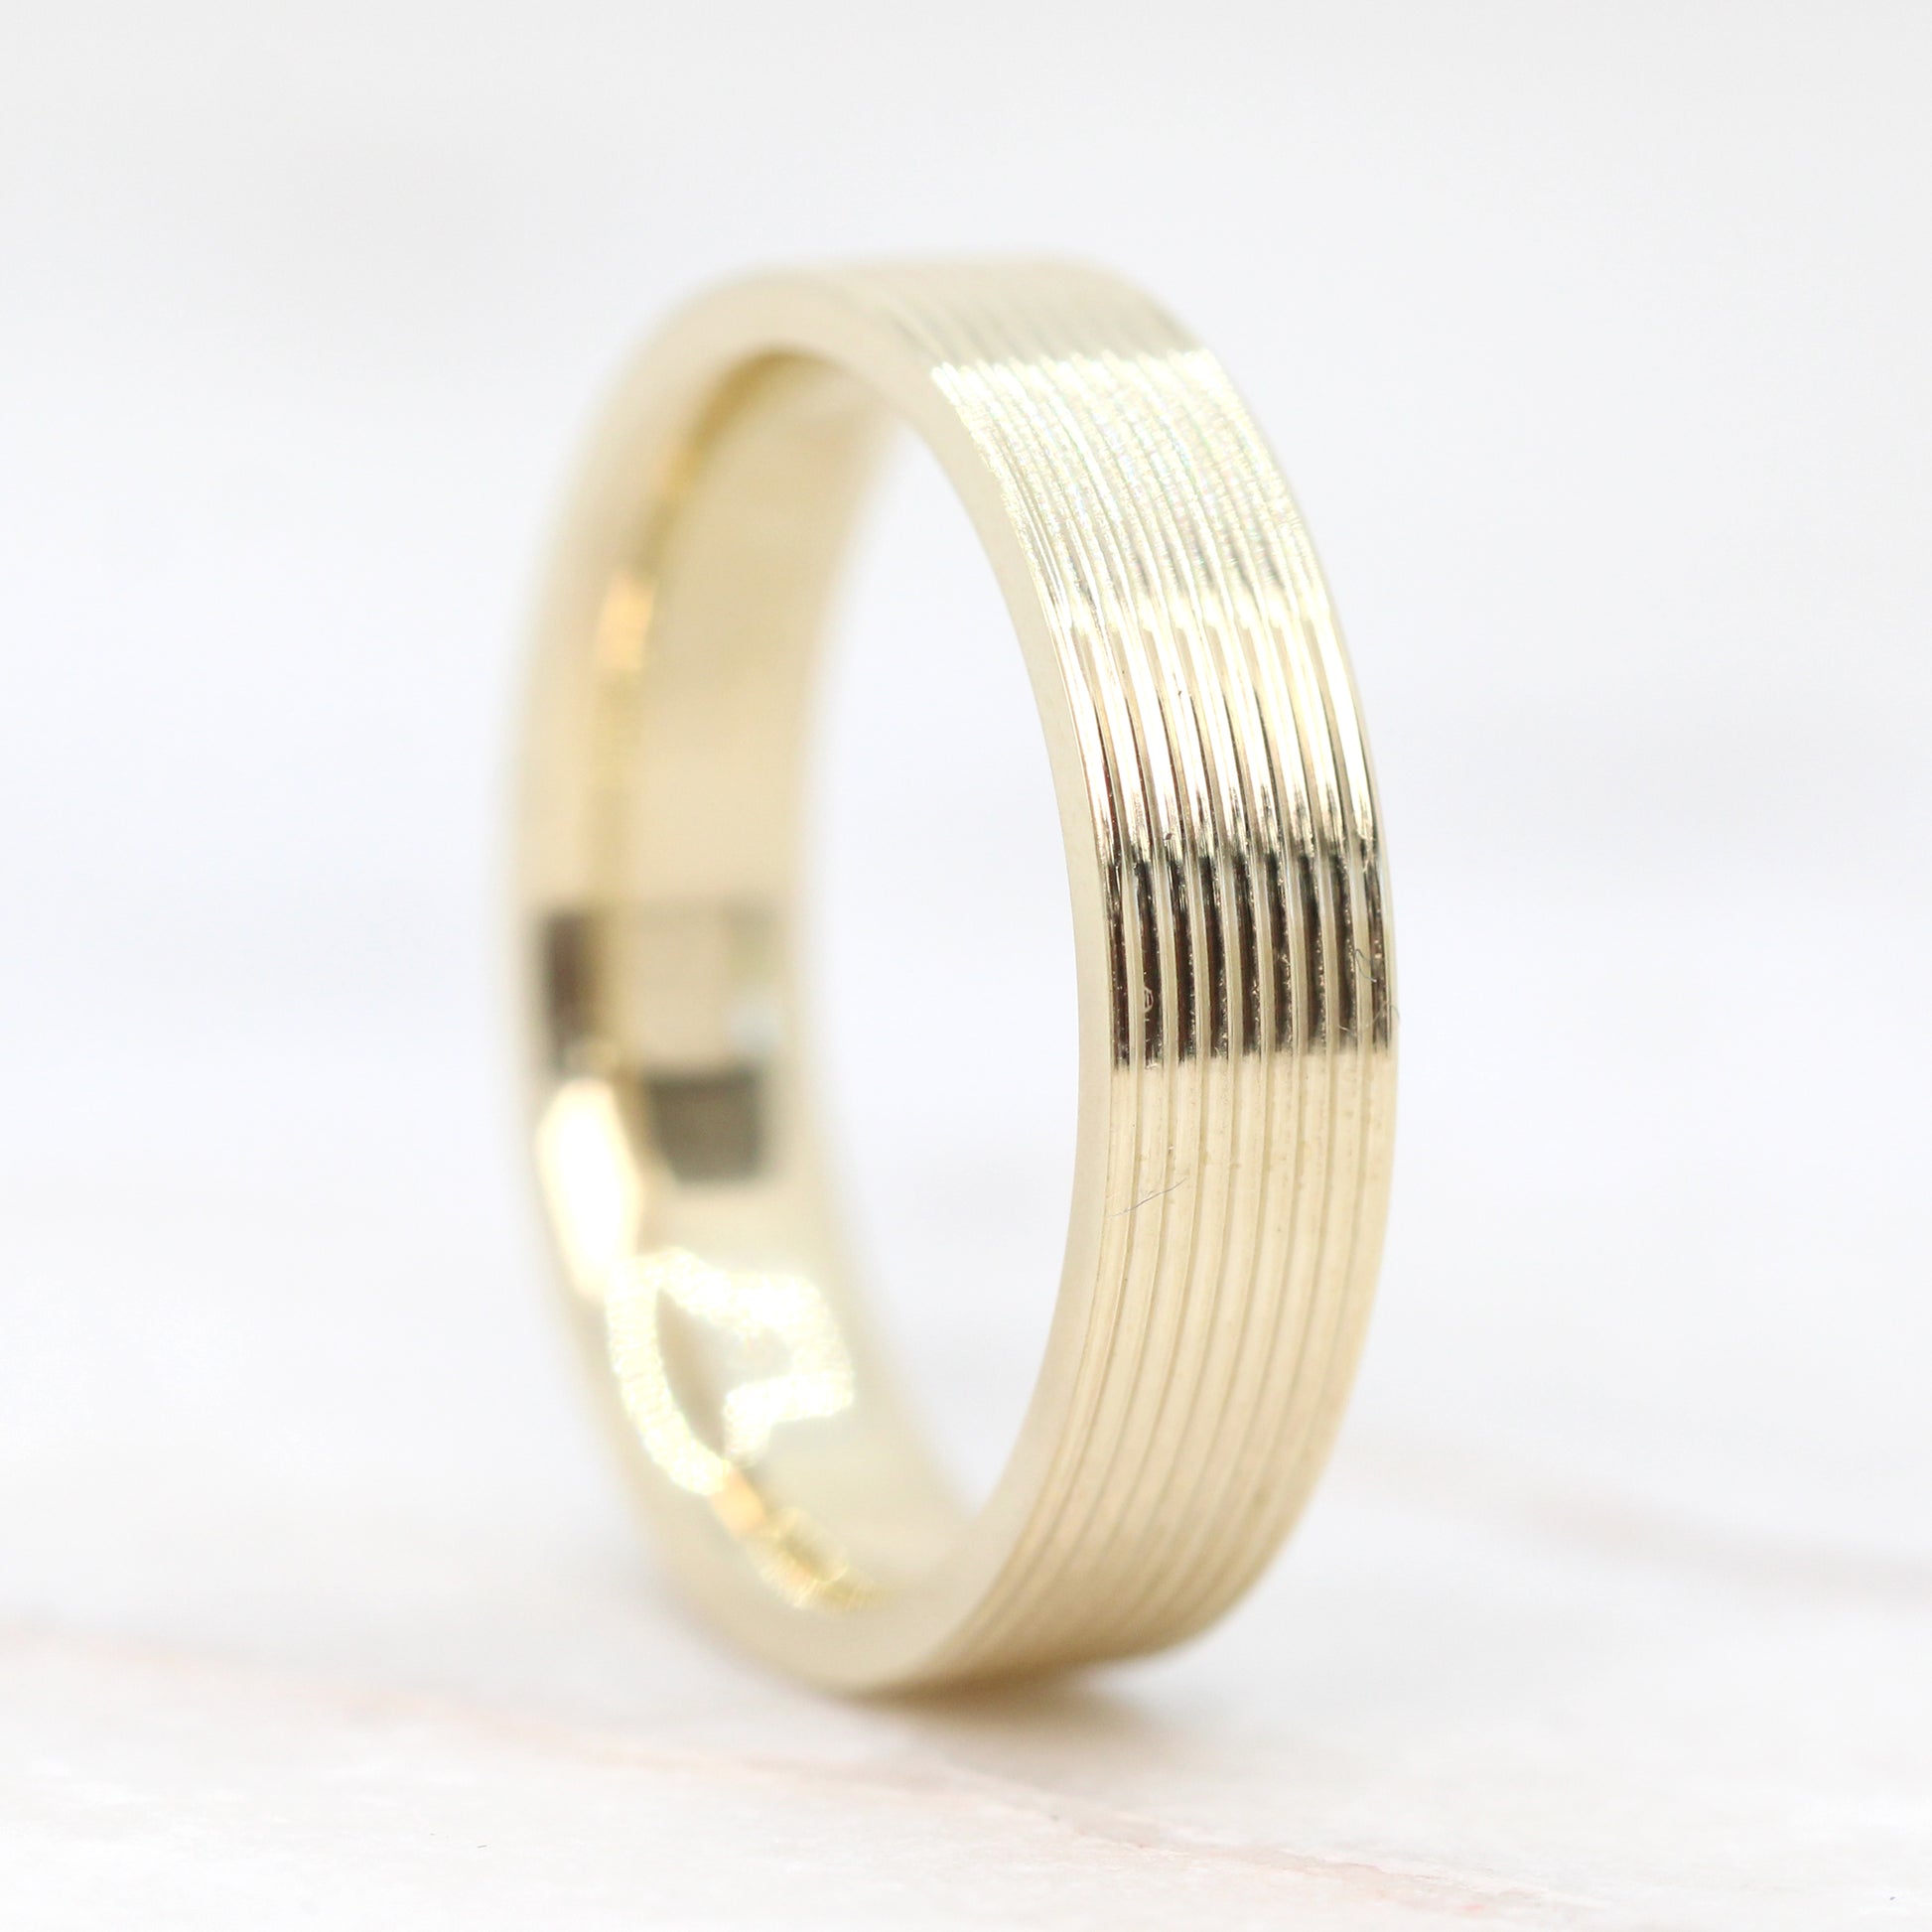 Samantha -  (M) Kody Band - Unisex Wedding Band - Made to Order, Choose Your Gold Tone - Midwinter Co. Alternative Bridal Rings and Modern Fine Jewelry